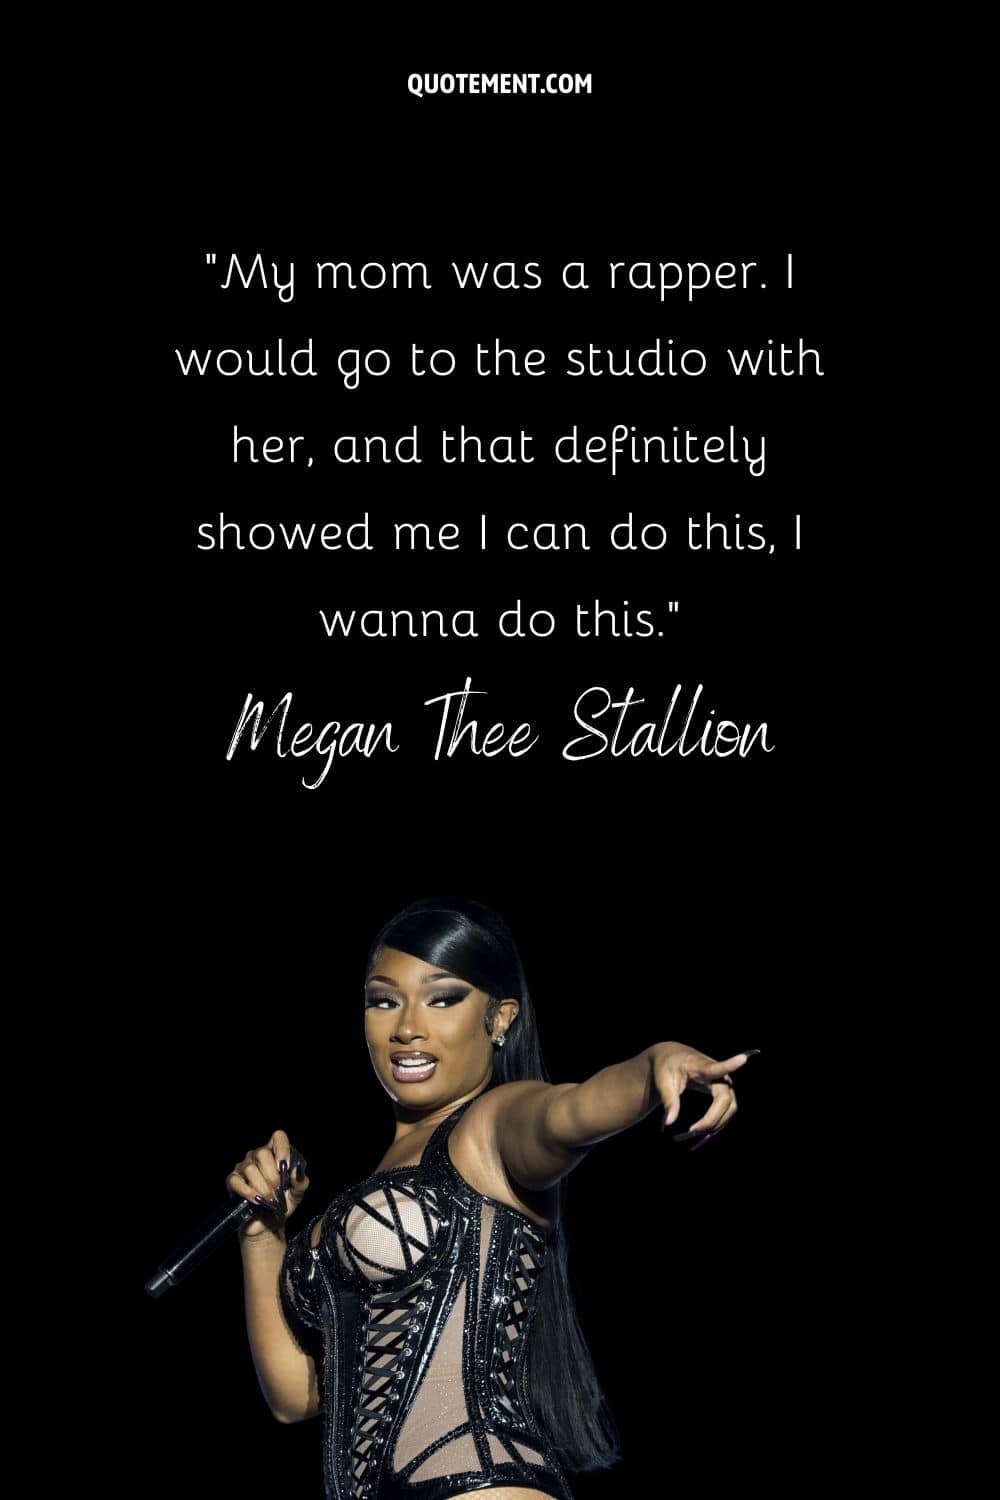 “My mom was a rapper. I would go to the studio with her, and that definitely showed me I can do this, I wanna do this.” — Megan Thee Stallion